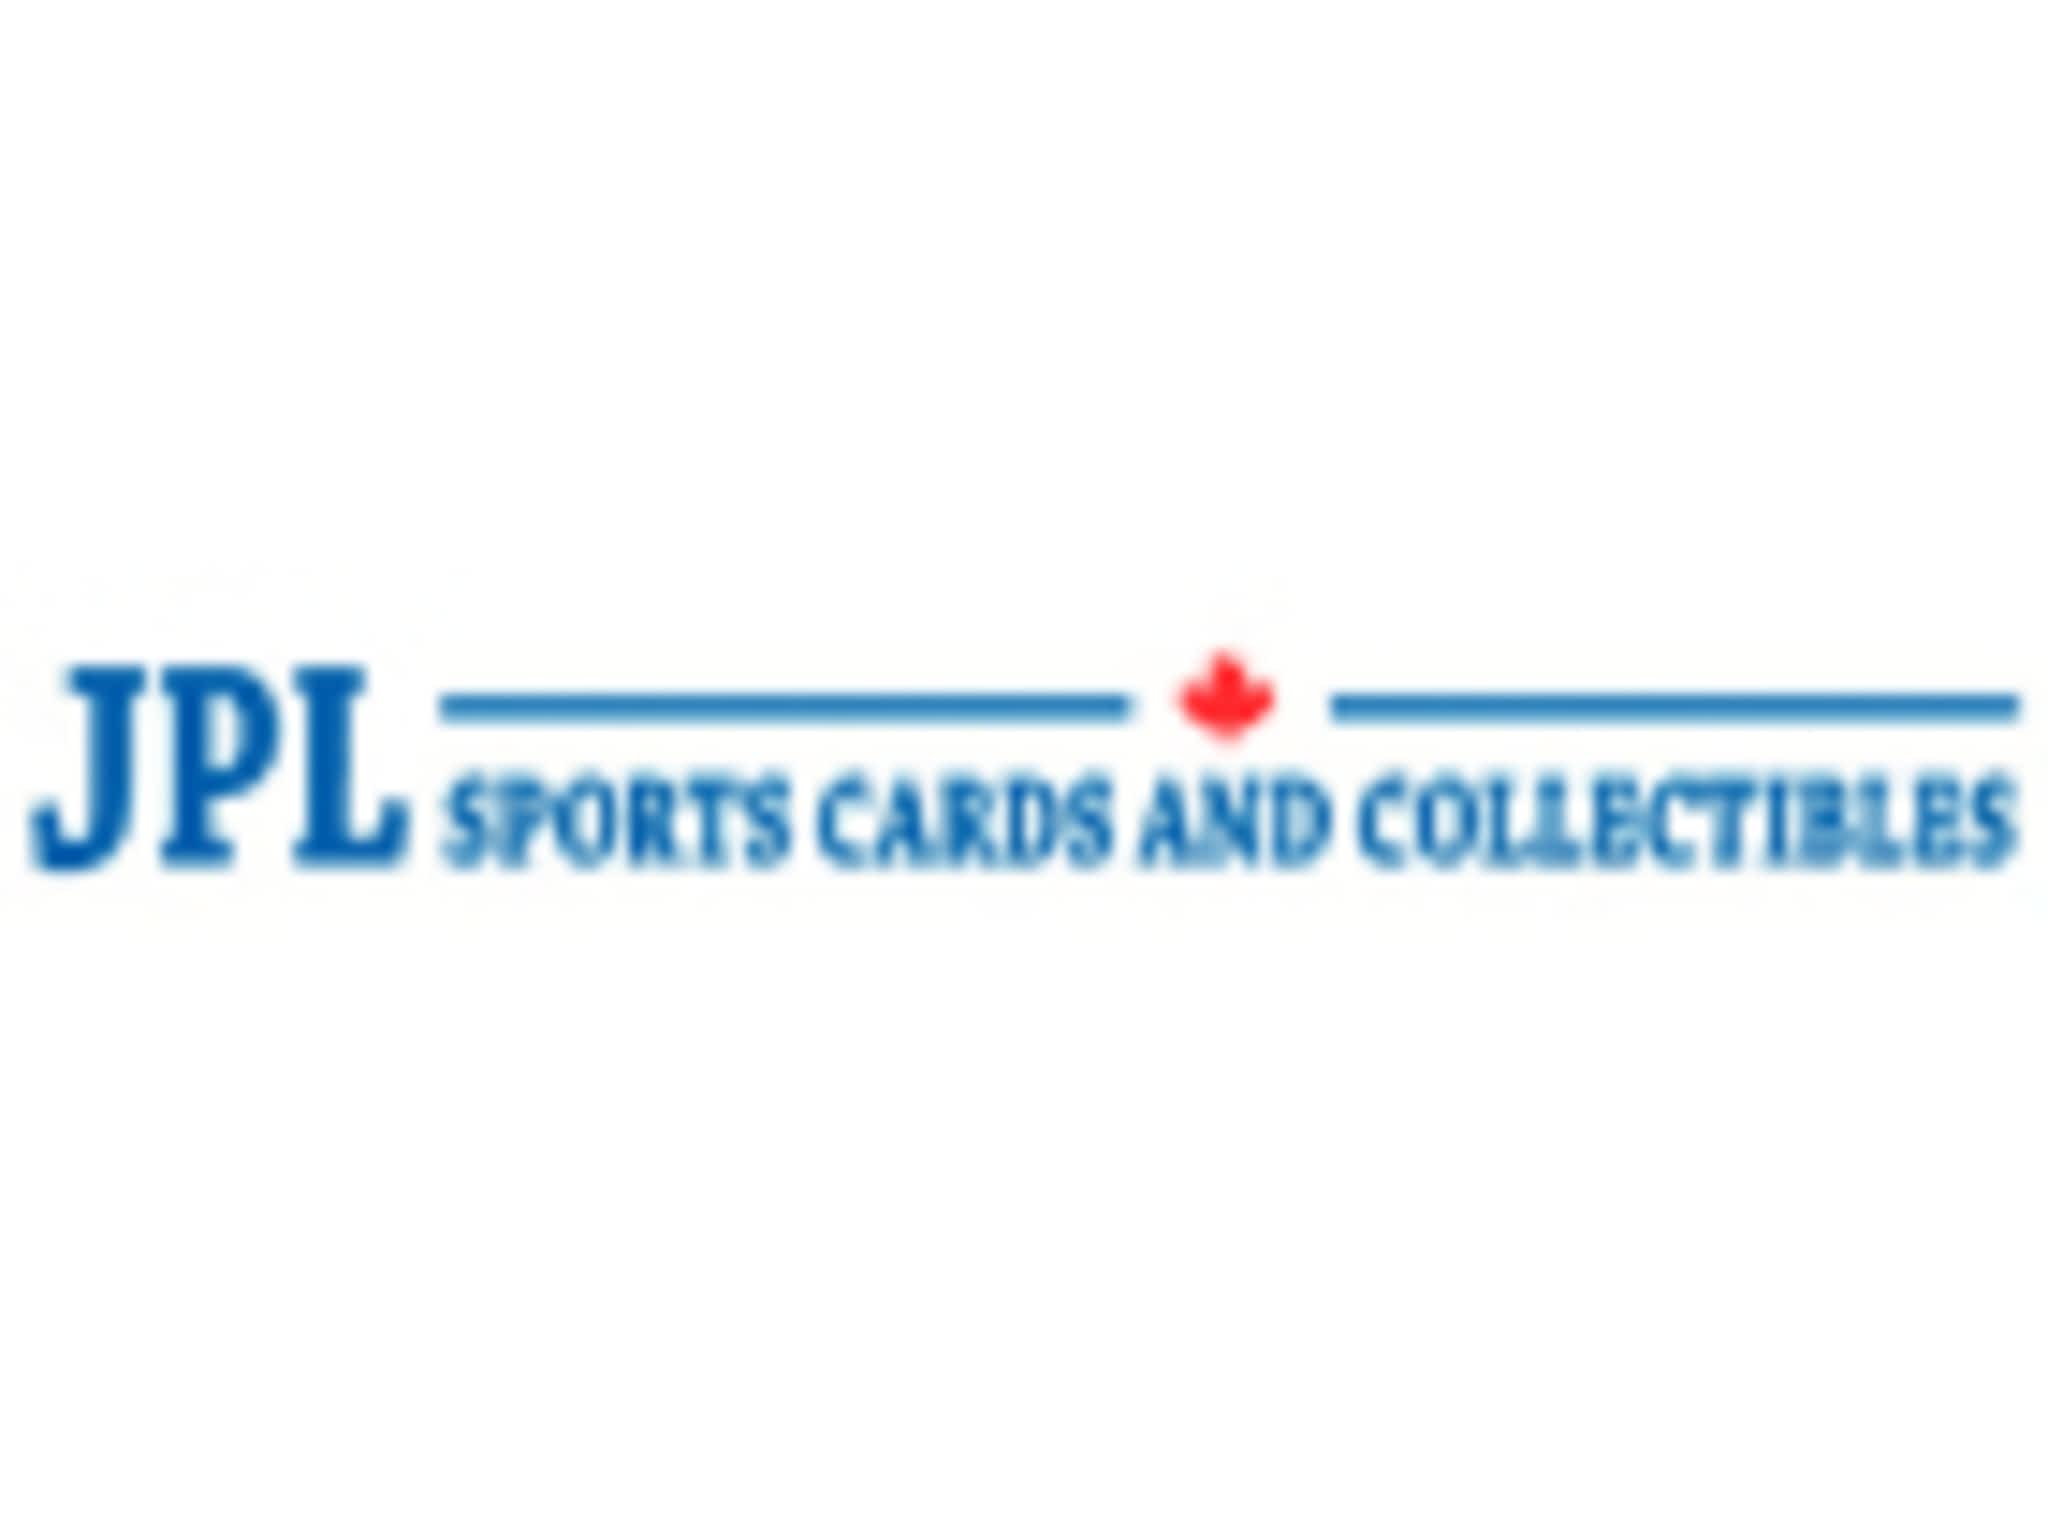 photo JPL Sports Cards And Collectibles